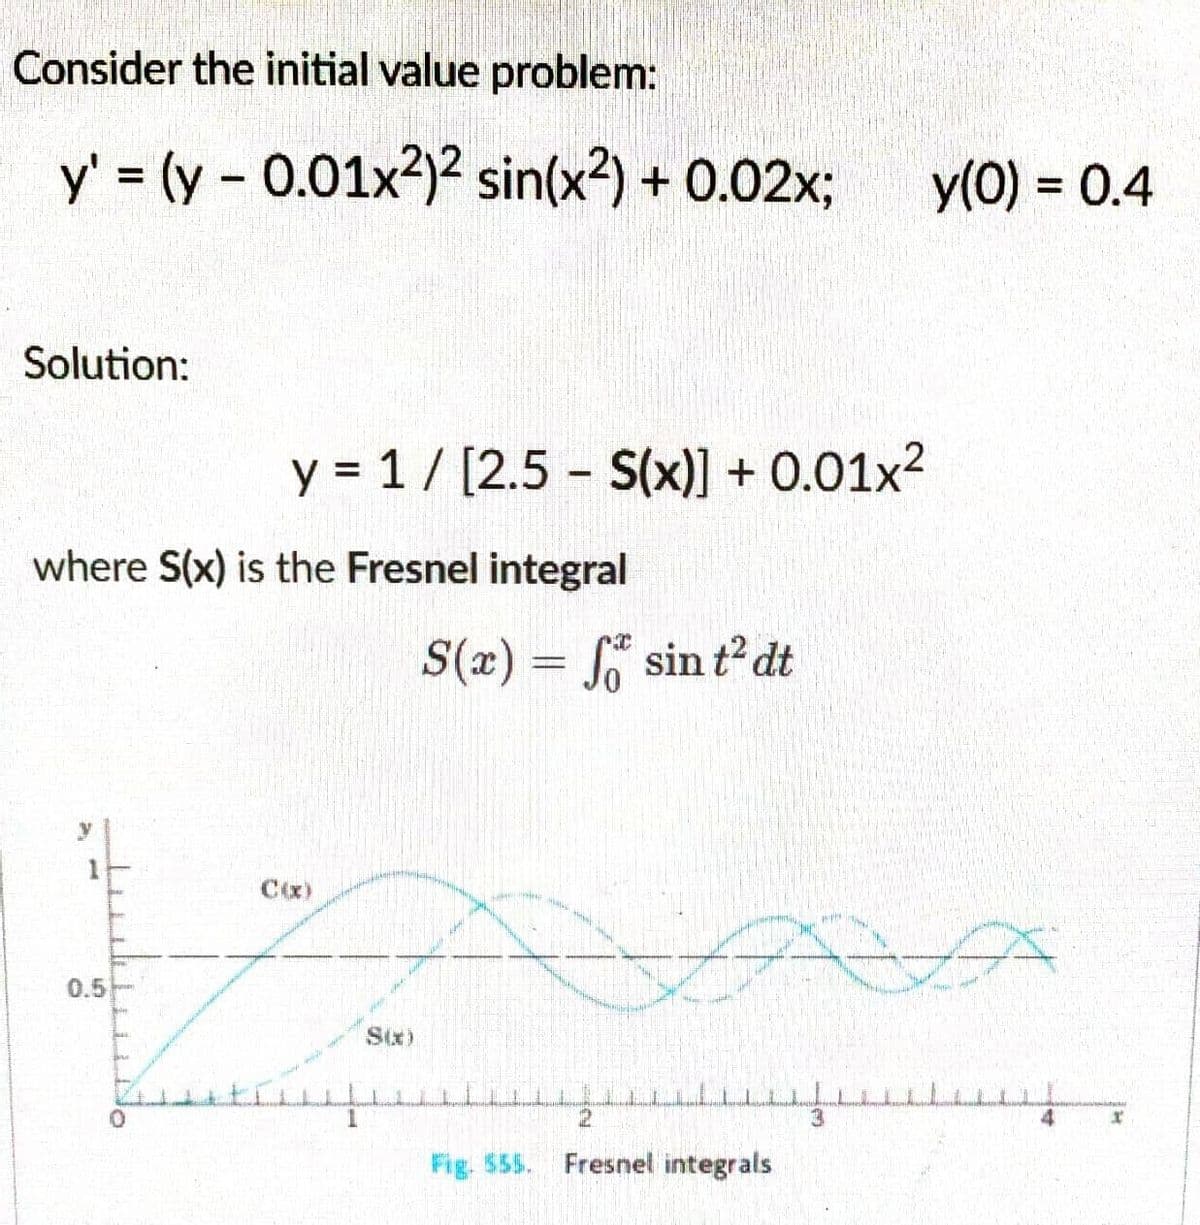 Consider the initial value problem:
y' = (y -0.01x²)² sin(x²) + 0.02x; y(0) = 0.4
Solution:
where S(x) is the Fresnel integral
14
y = 1/[2.5 - S(x)] +0.01x²
0.5
C(x)
per profe
1
S(x) = f sin t² dt
2
Fig. $55. Fresnel integrals
LE